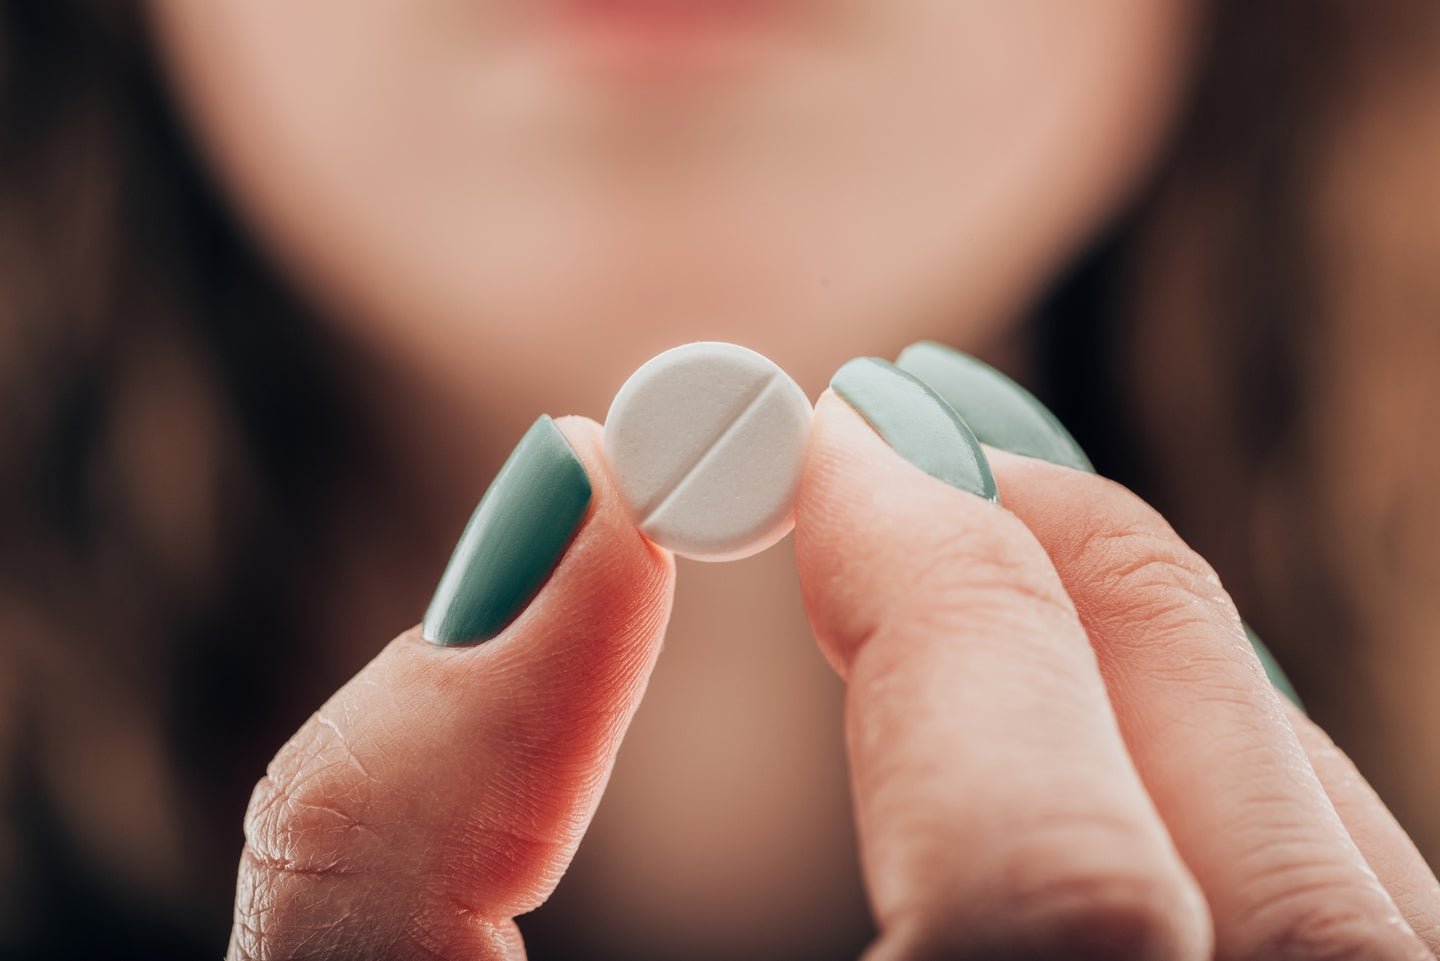 What’s the difference between morning-after pills and abortion medications?